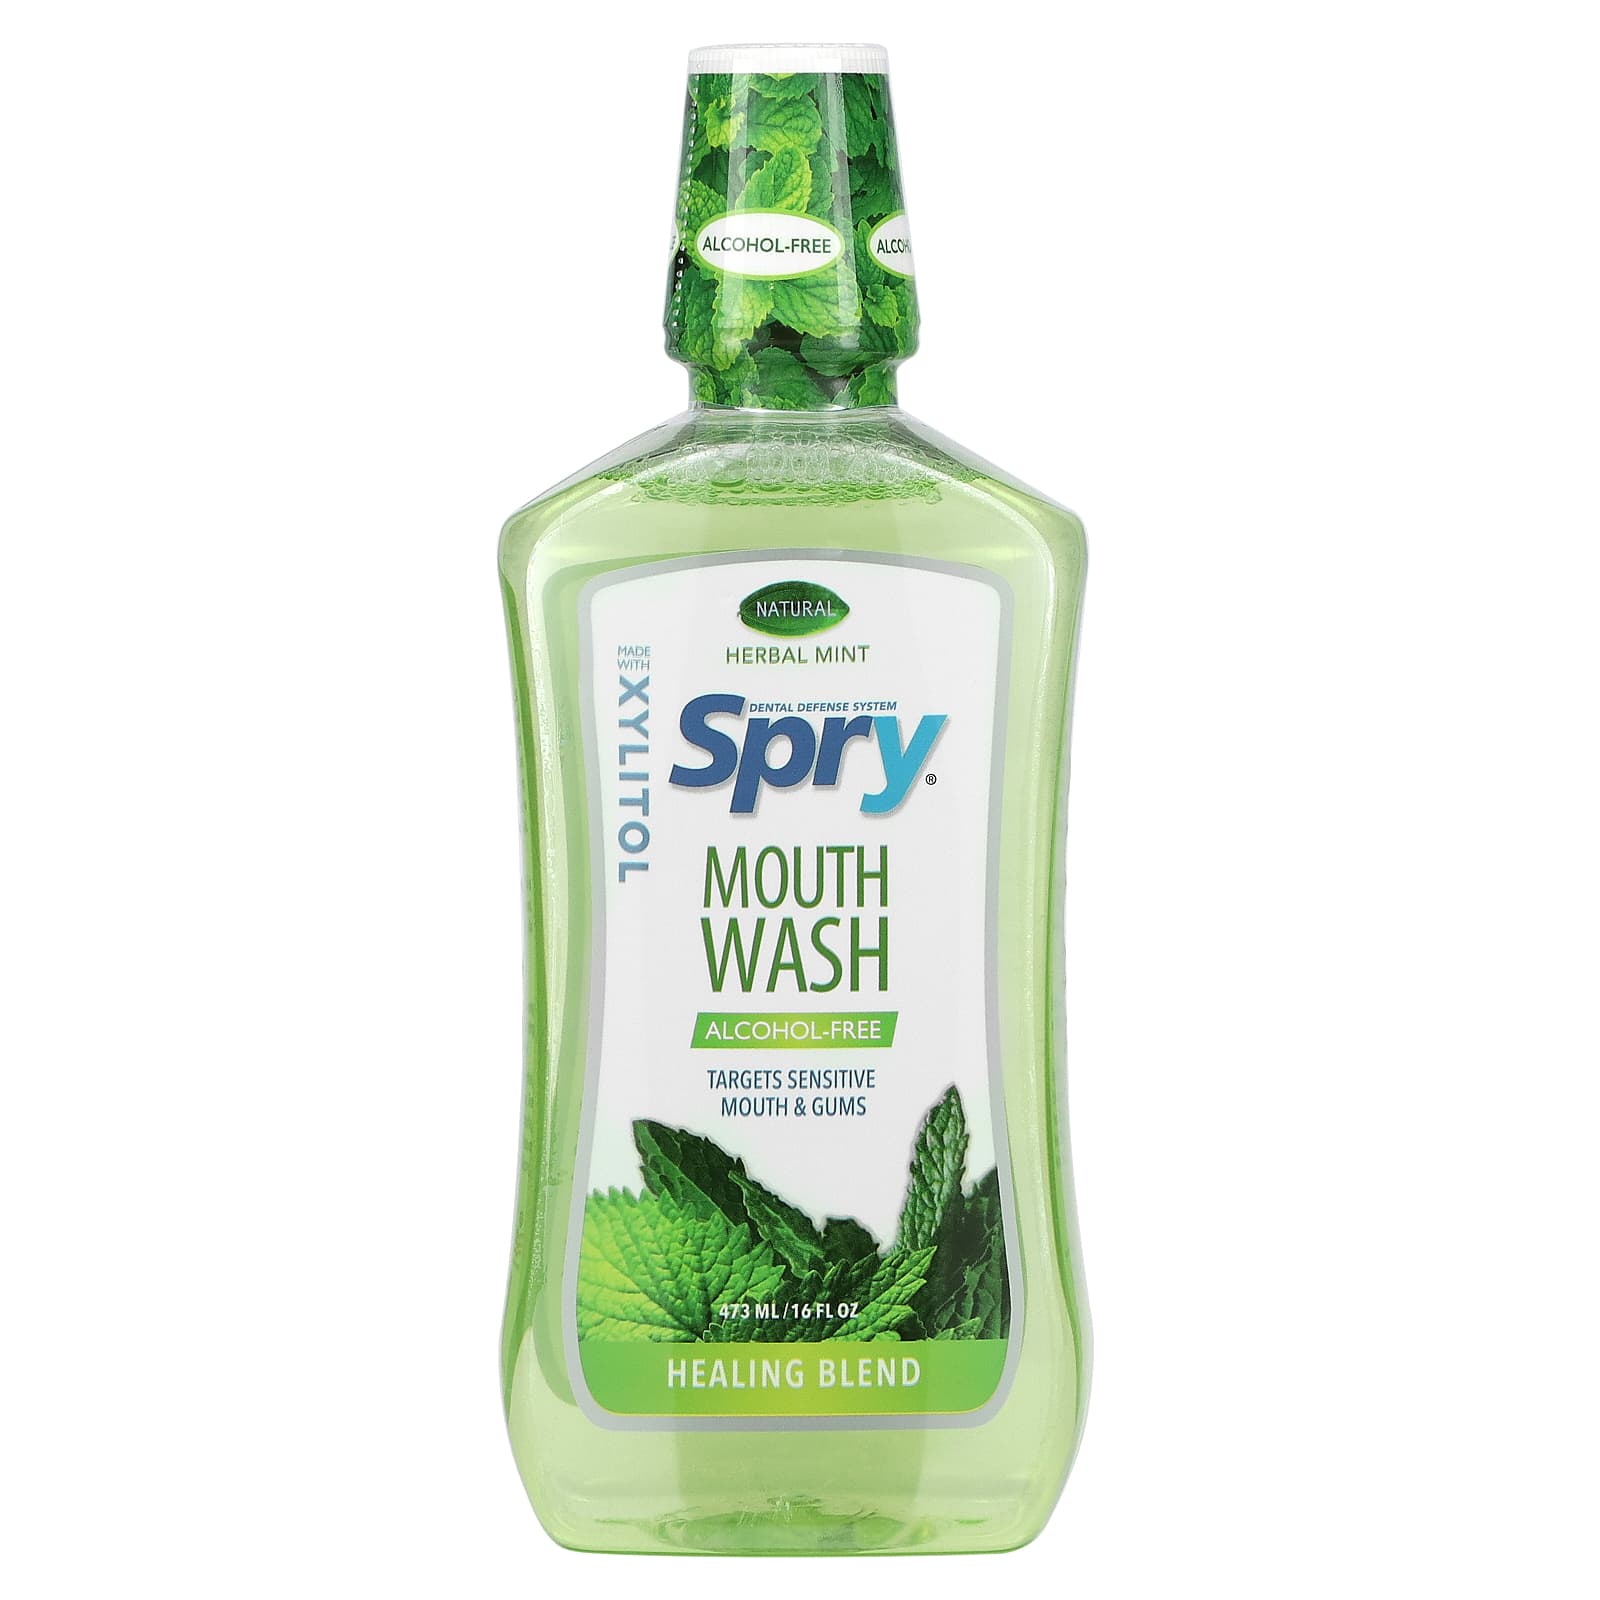 Spry Mouth Wash